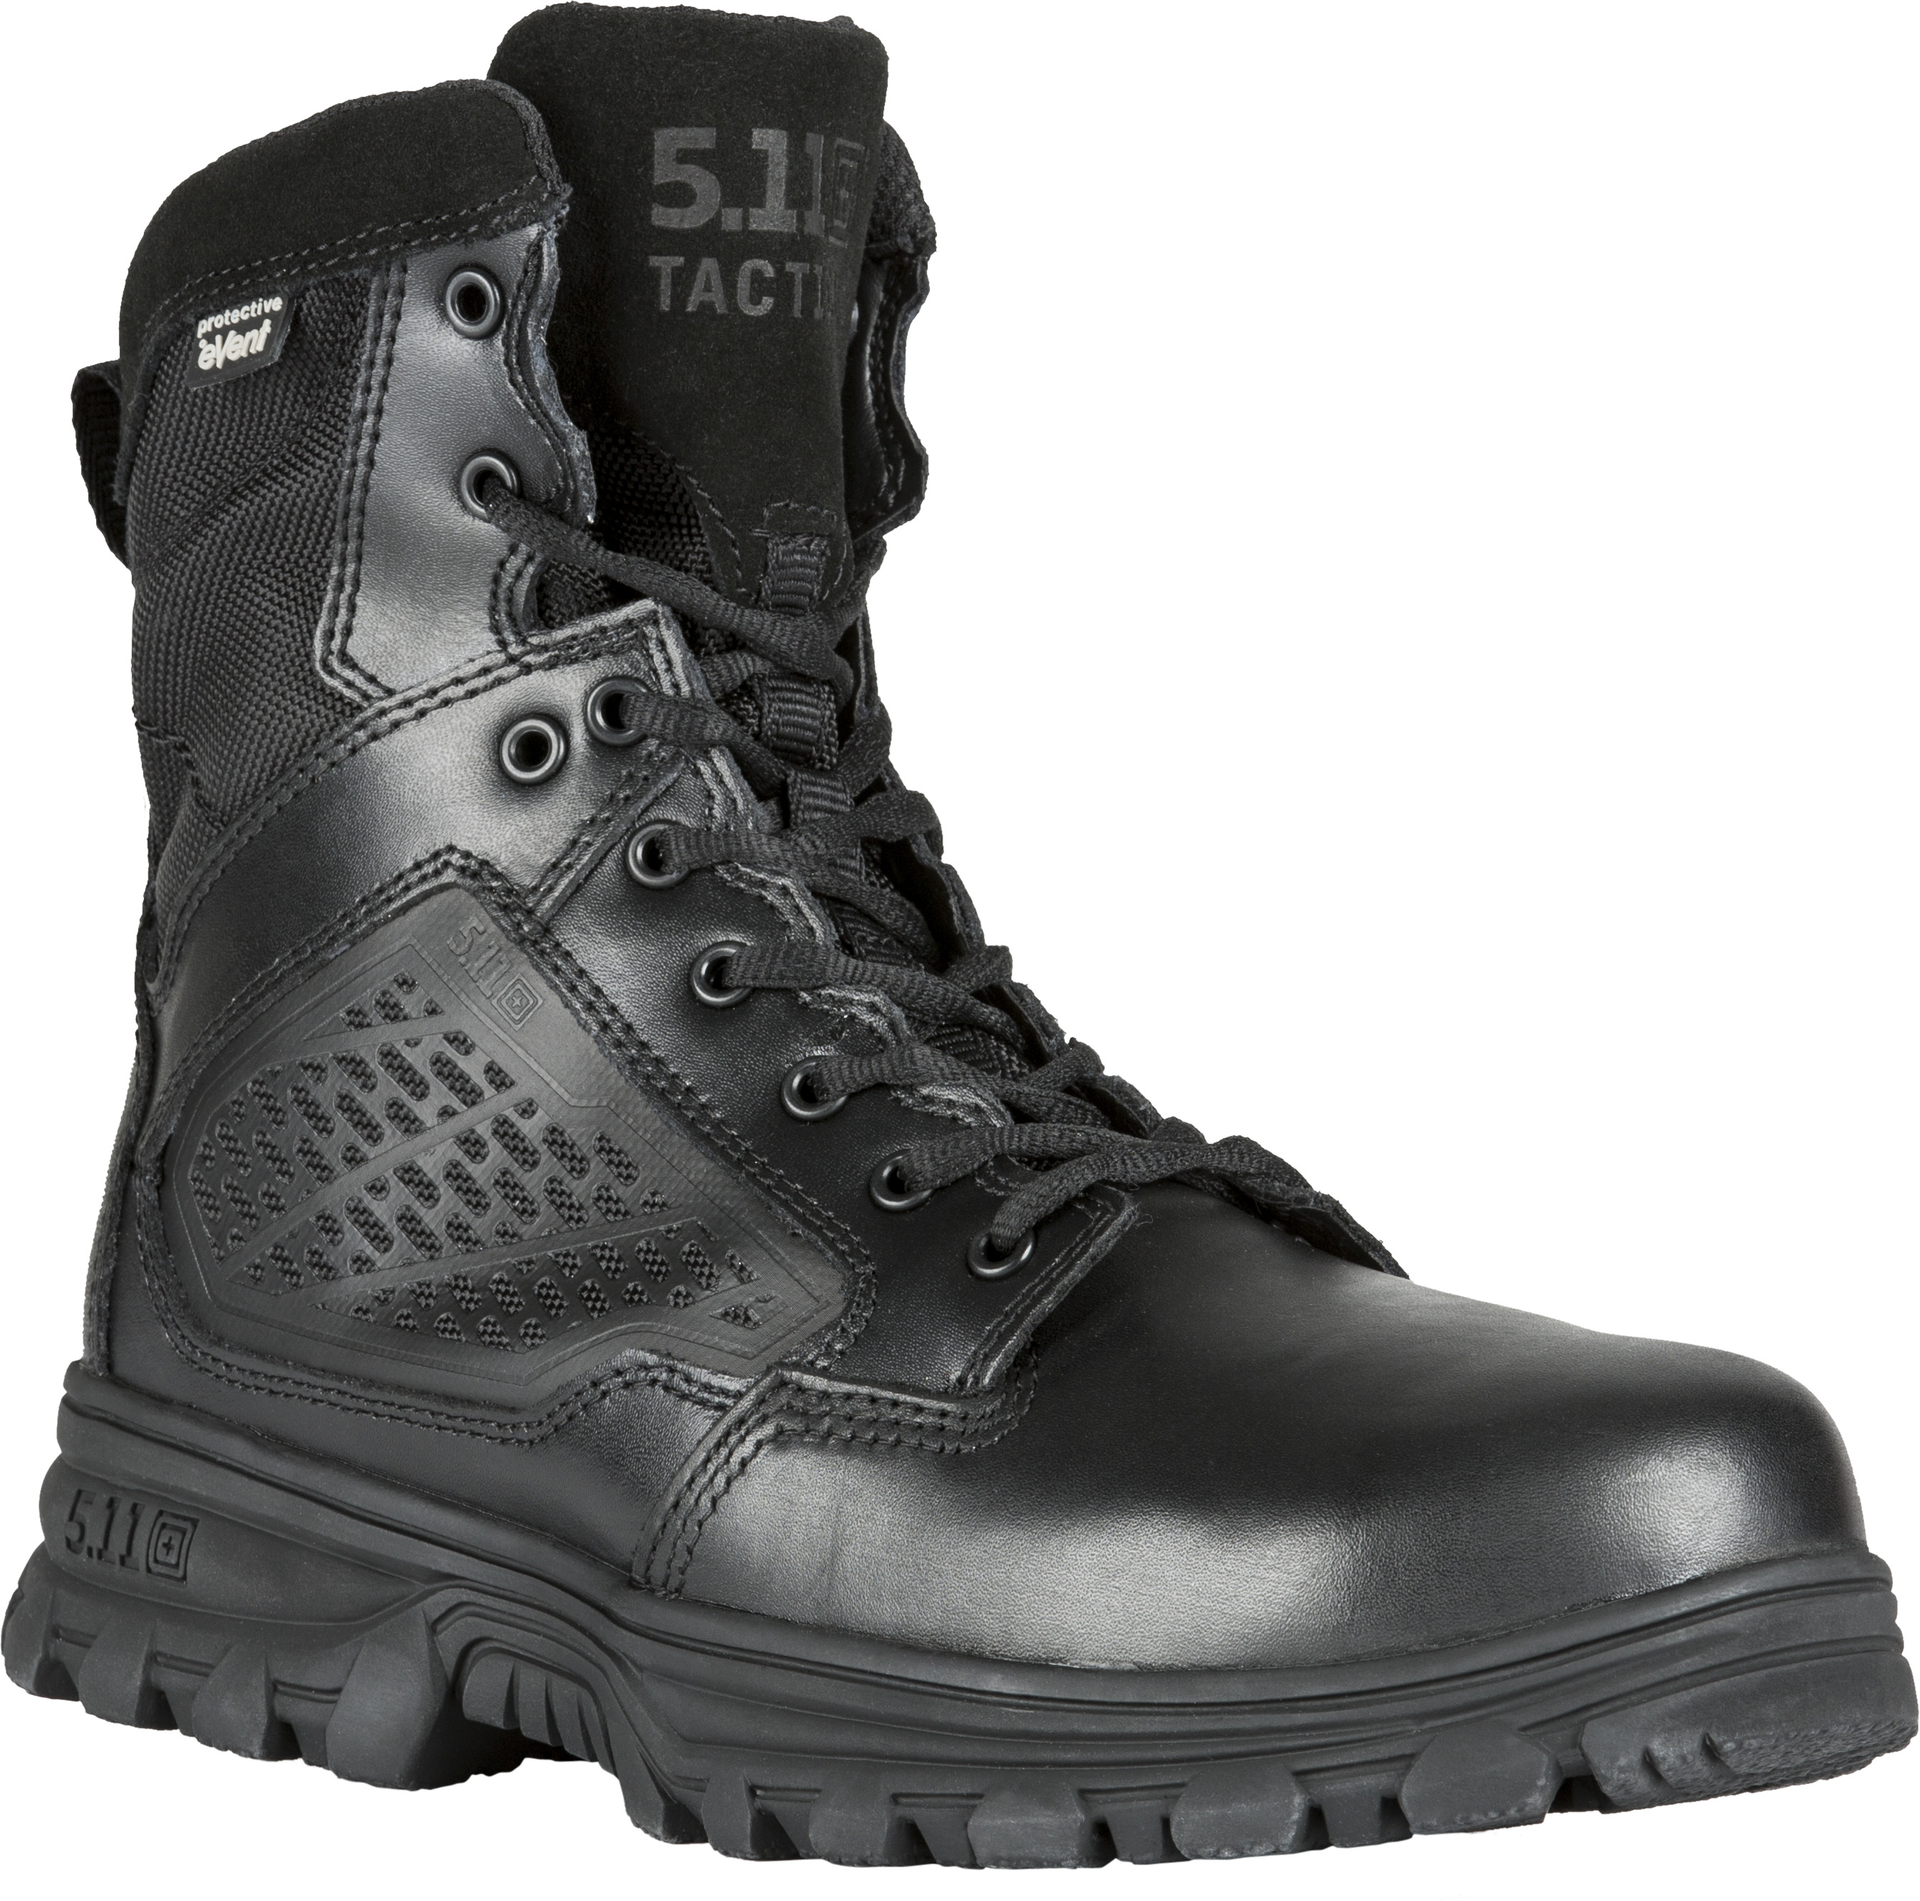 511 tactical series boots